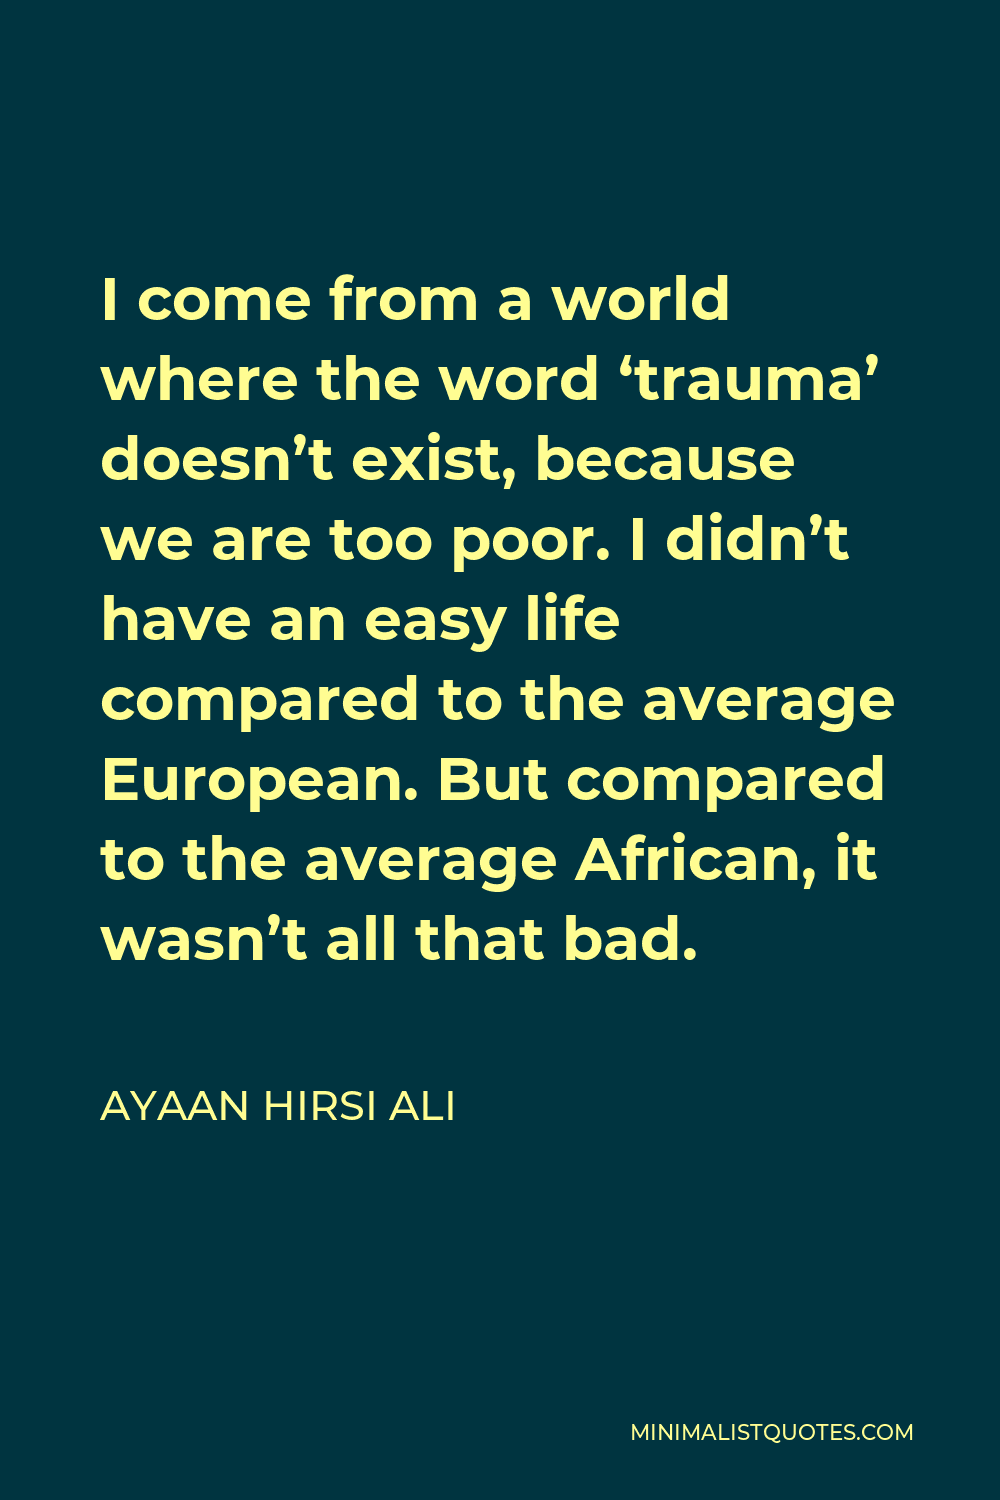 Ayaan Hirsi Ali Quote - I come from a world where the word ‘trauma’ doesn’t exist, because we are too poor. I didn’t have an easy life compared to the average European. But compared to the average African, it wasn’t all that bad.